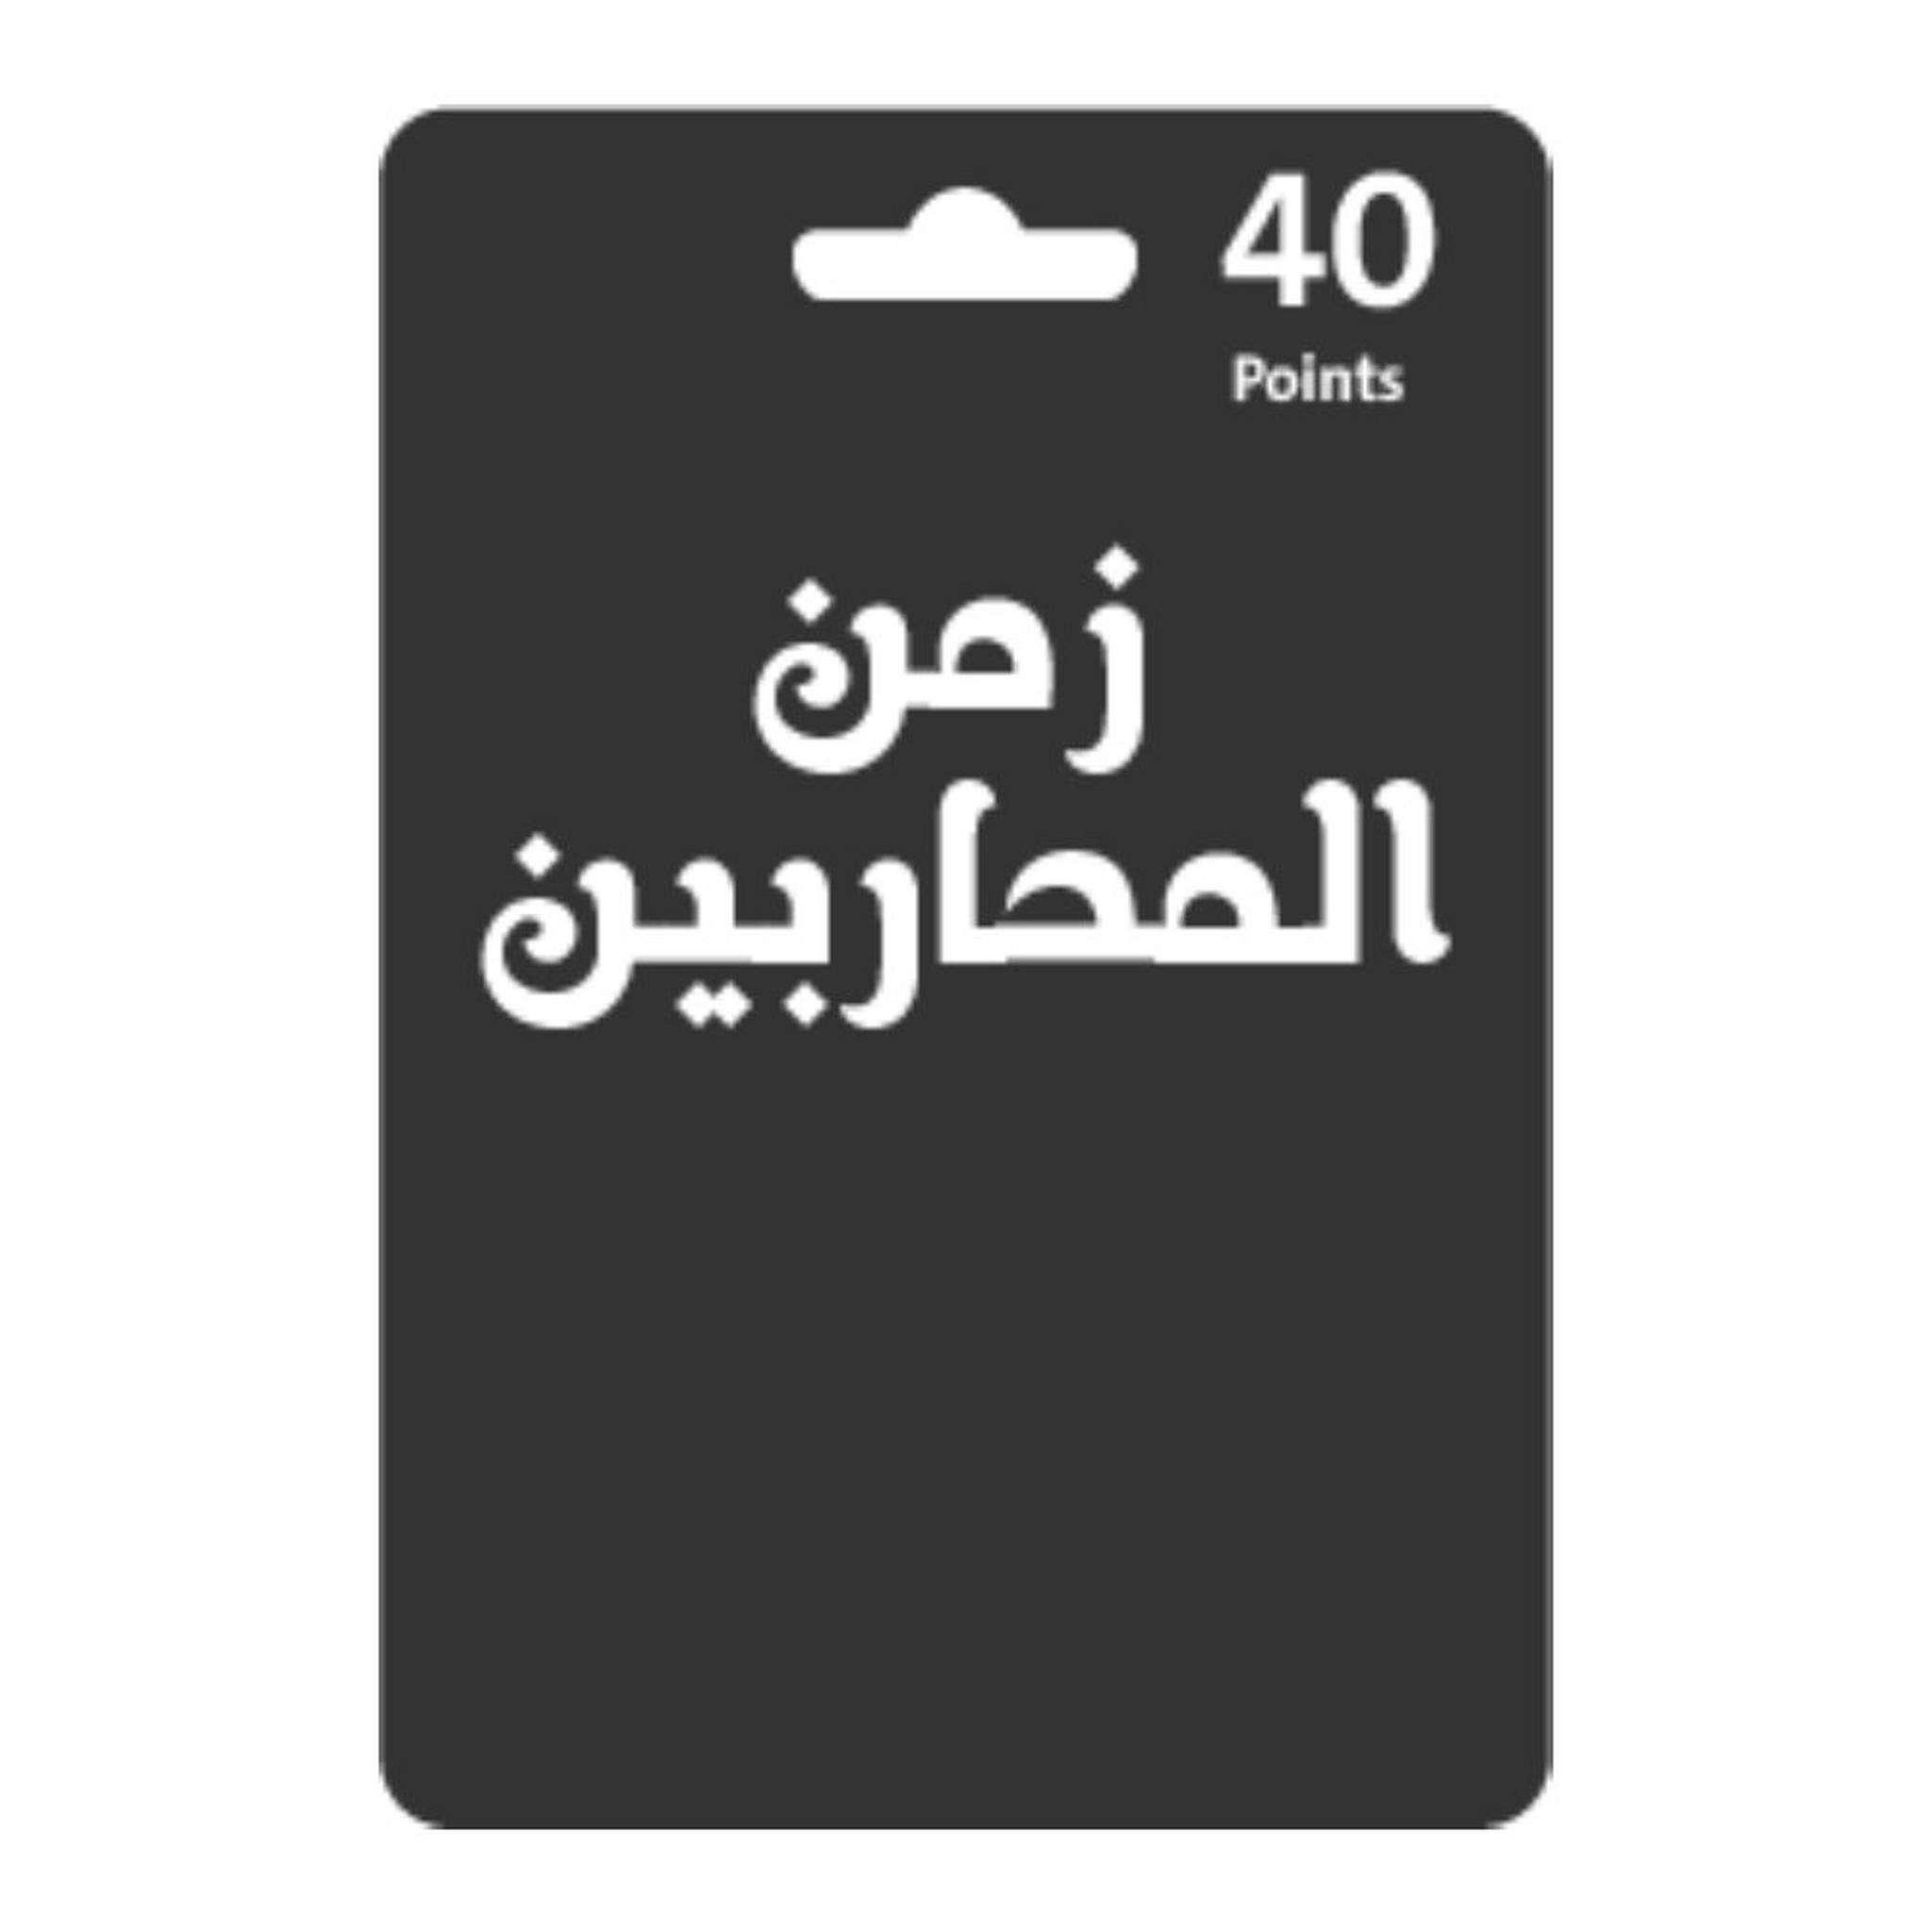 Zaman Almoharbeen 40 Points Card